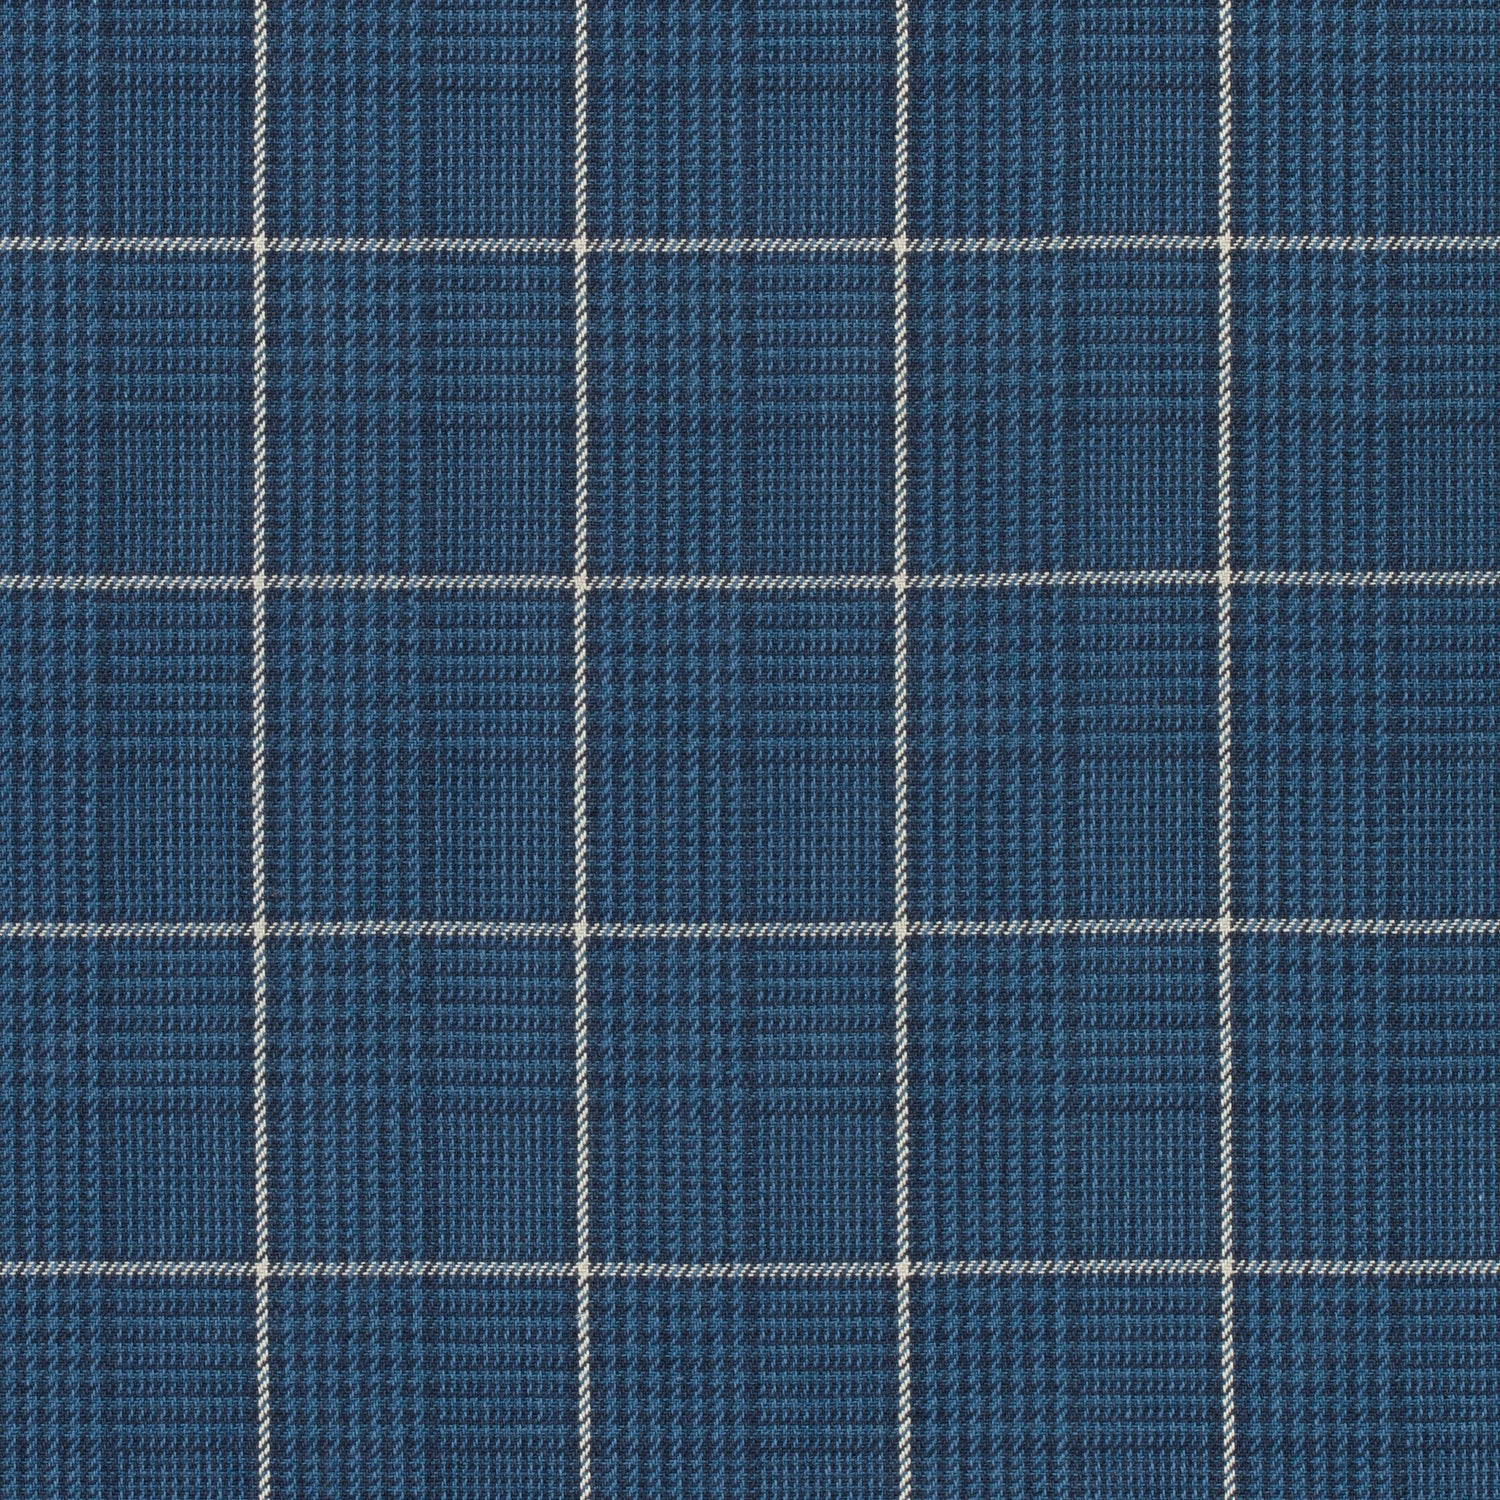 Grassmarket Check fabric in navy color - pattern number W710201 - by Thibaut in the Colony collection